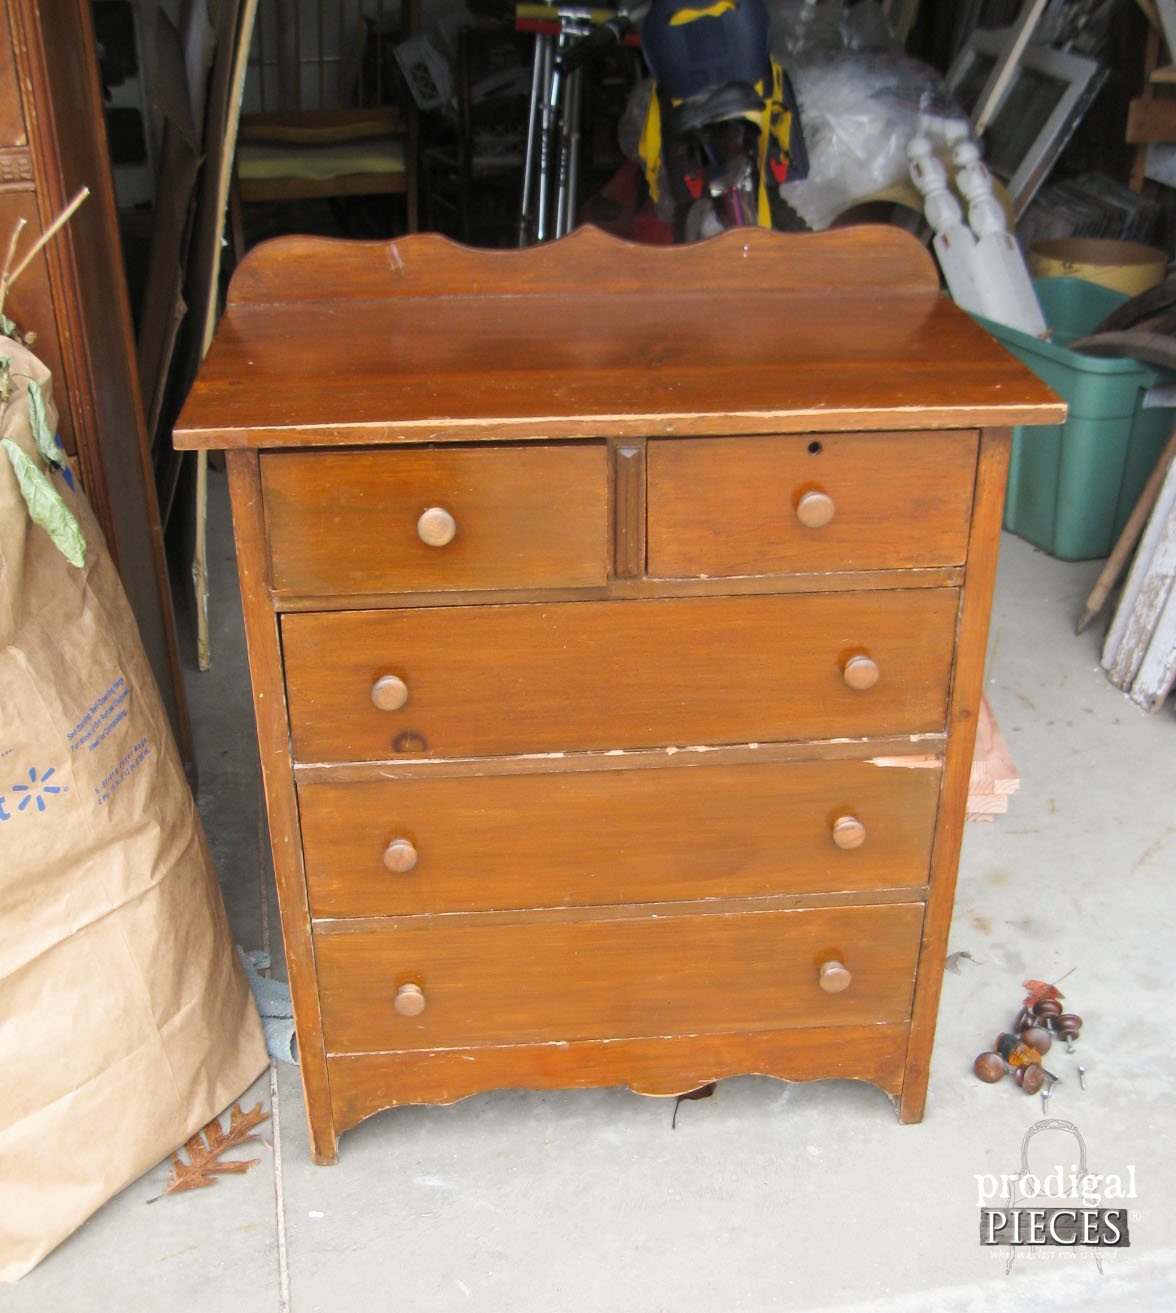 Curbside Find Child's Chest of Drawers Before Made into Card Catalog by Prodigal PIeces | www.prodigalpieces.com